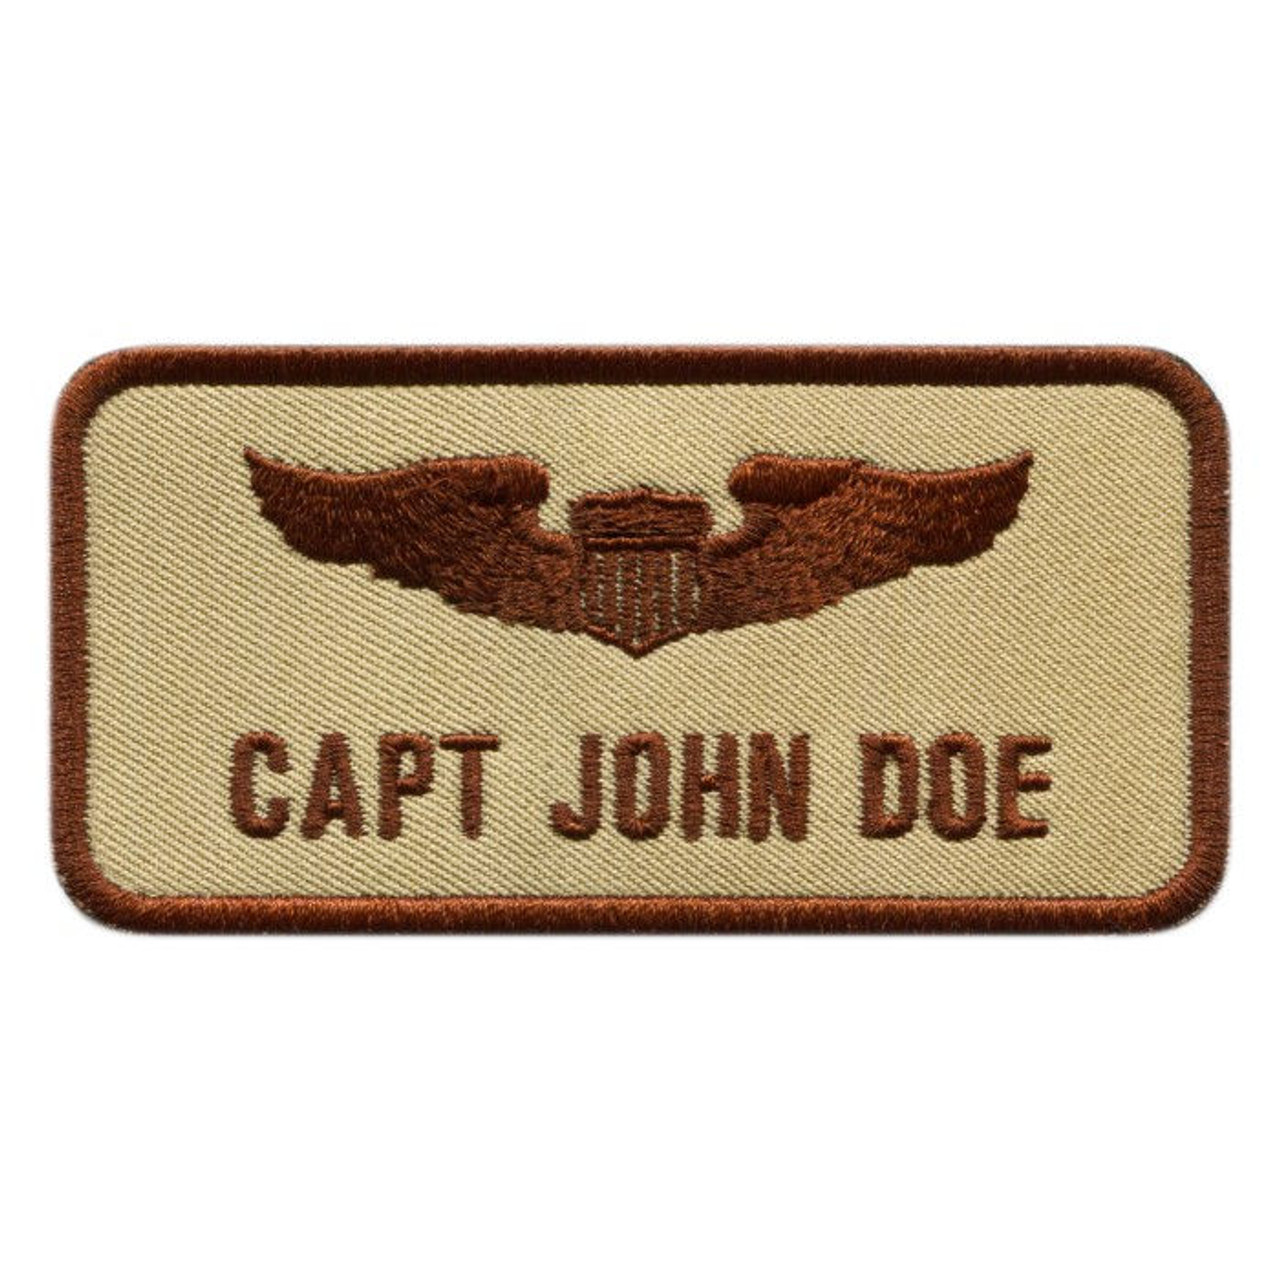 Cool-Patches Matt Name Tag Patch Uniform ID Work Shirt Badge